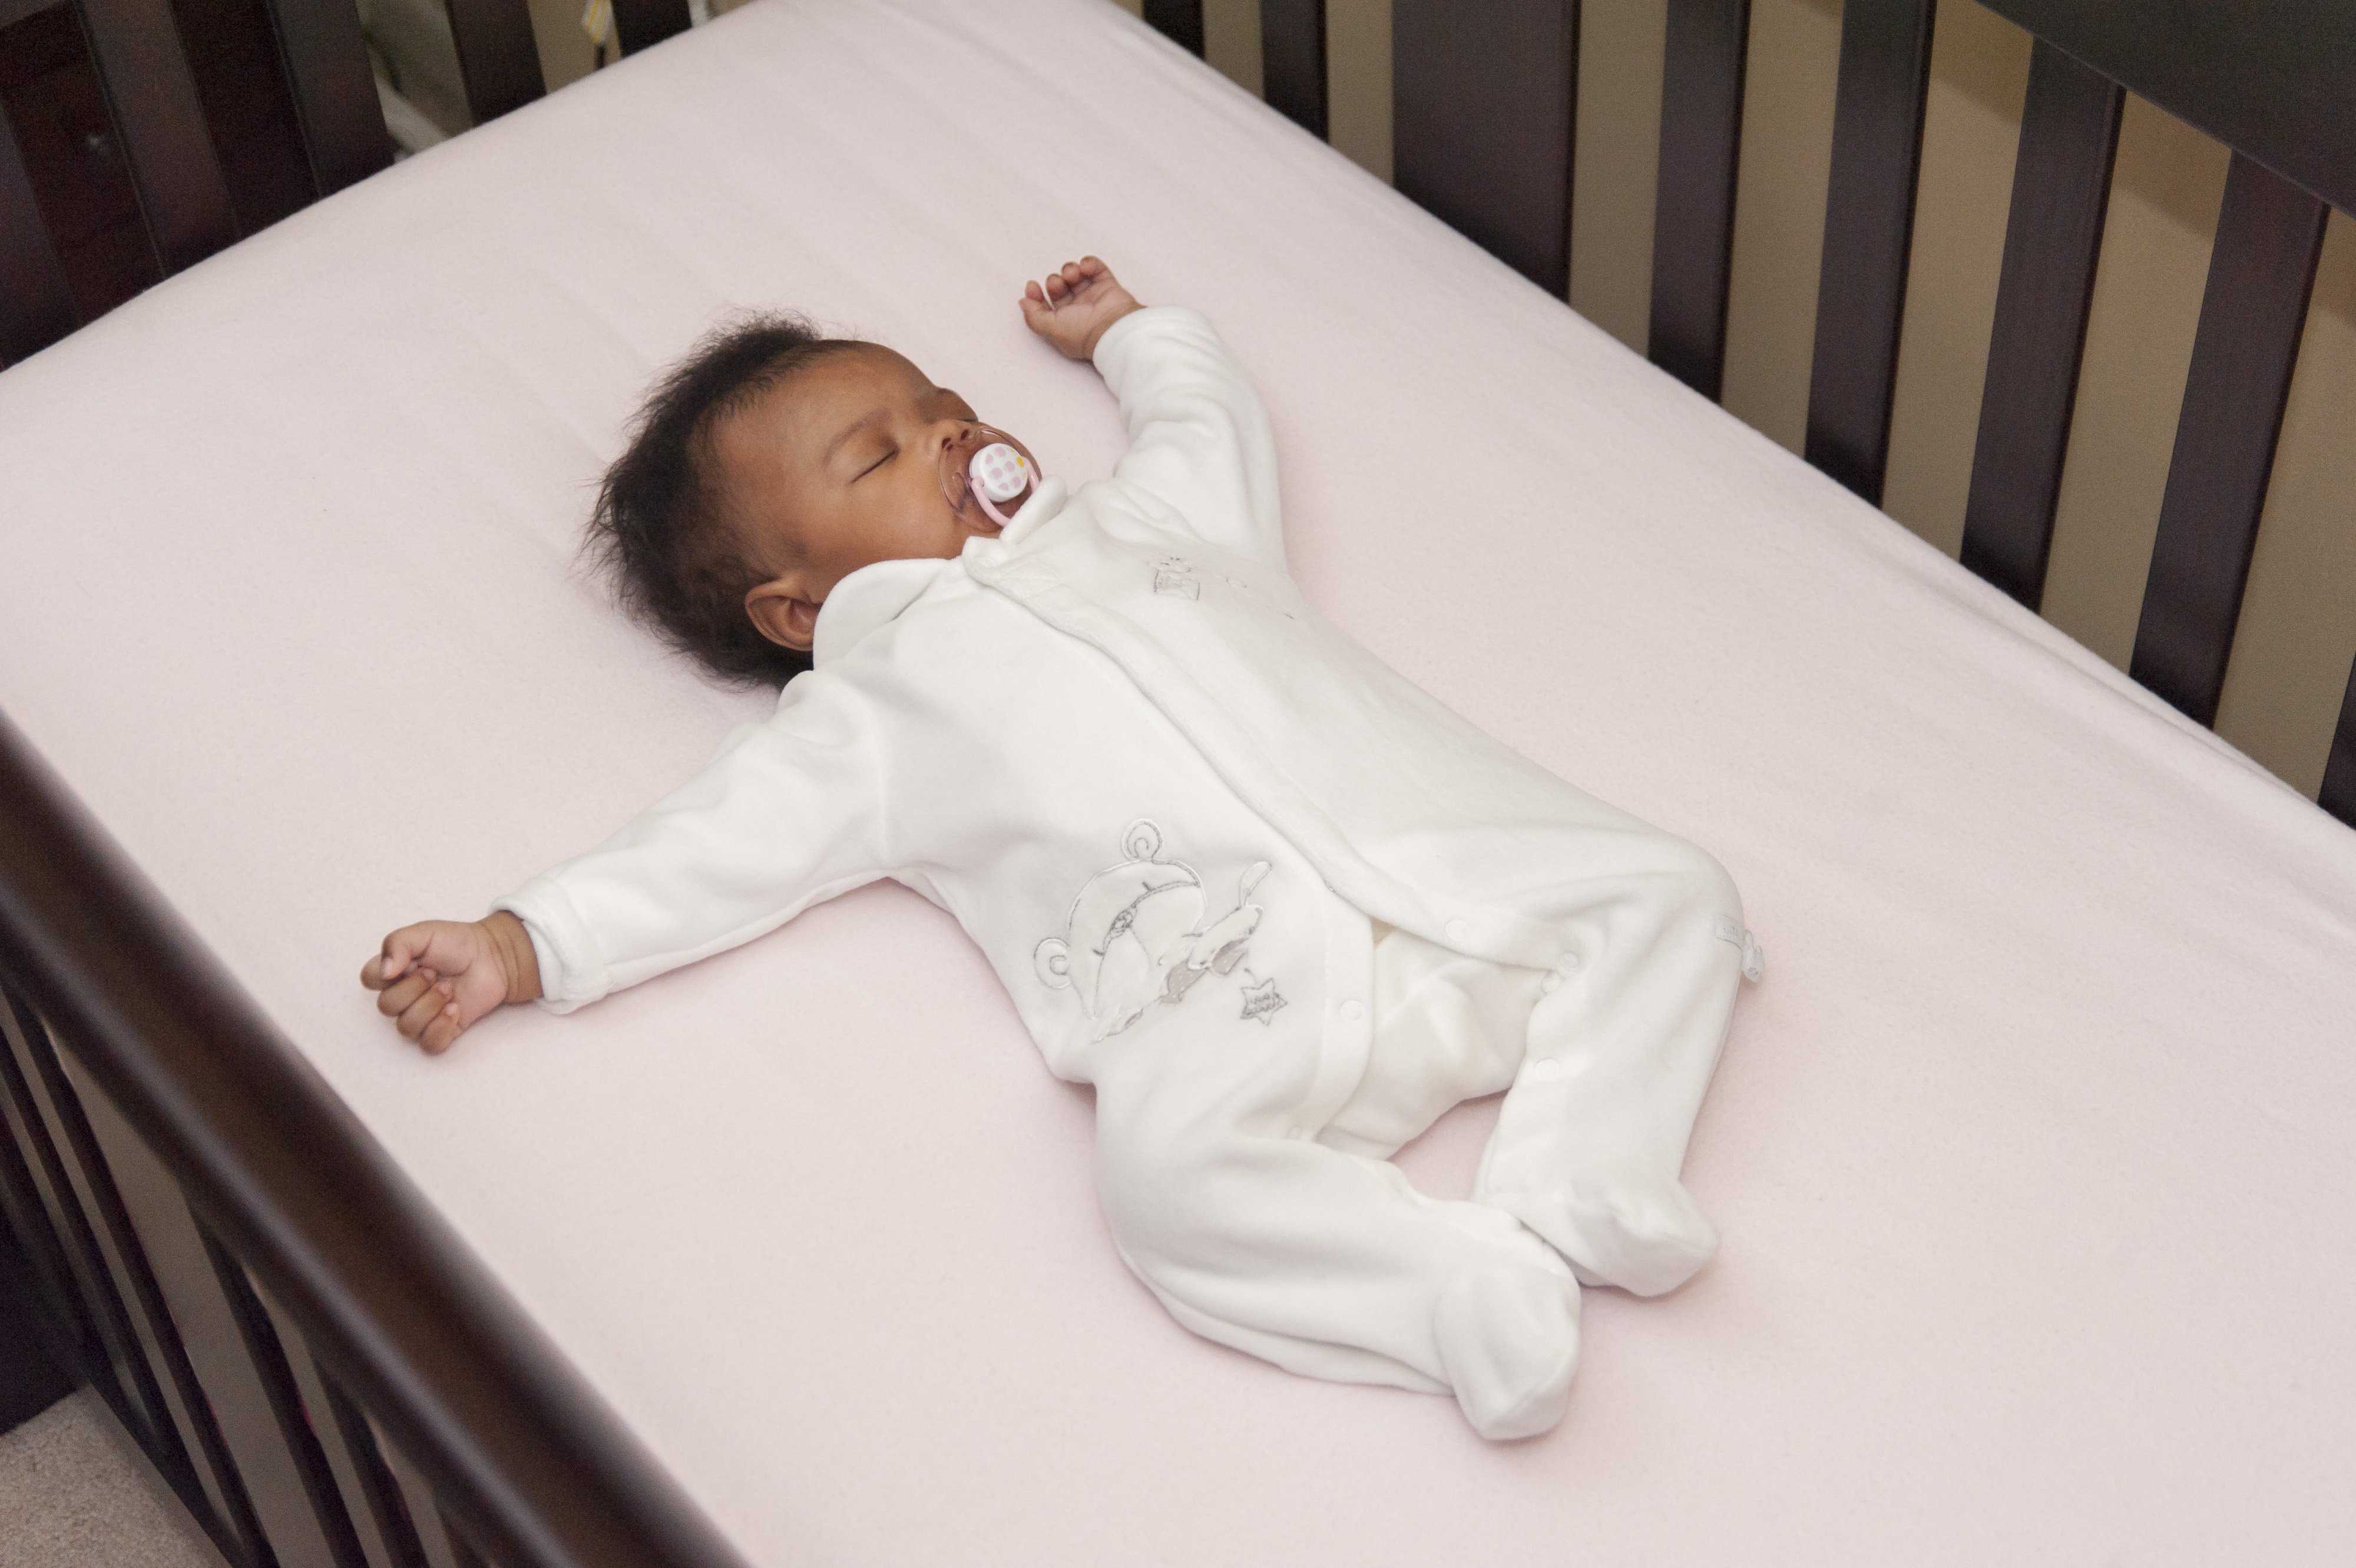 Health Resource Spotlight: Reducing the Risk of SIDS in Child Care Settings